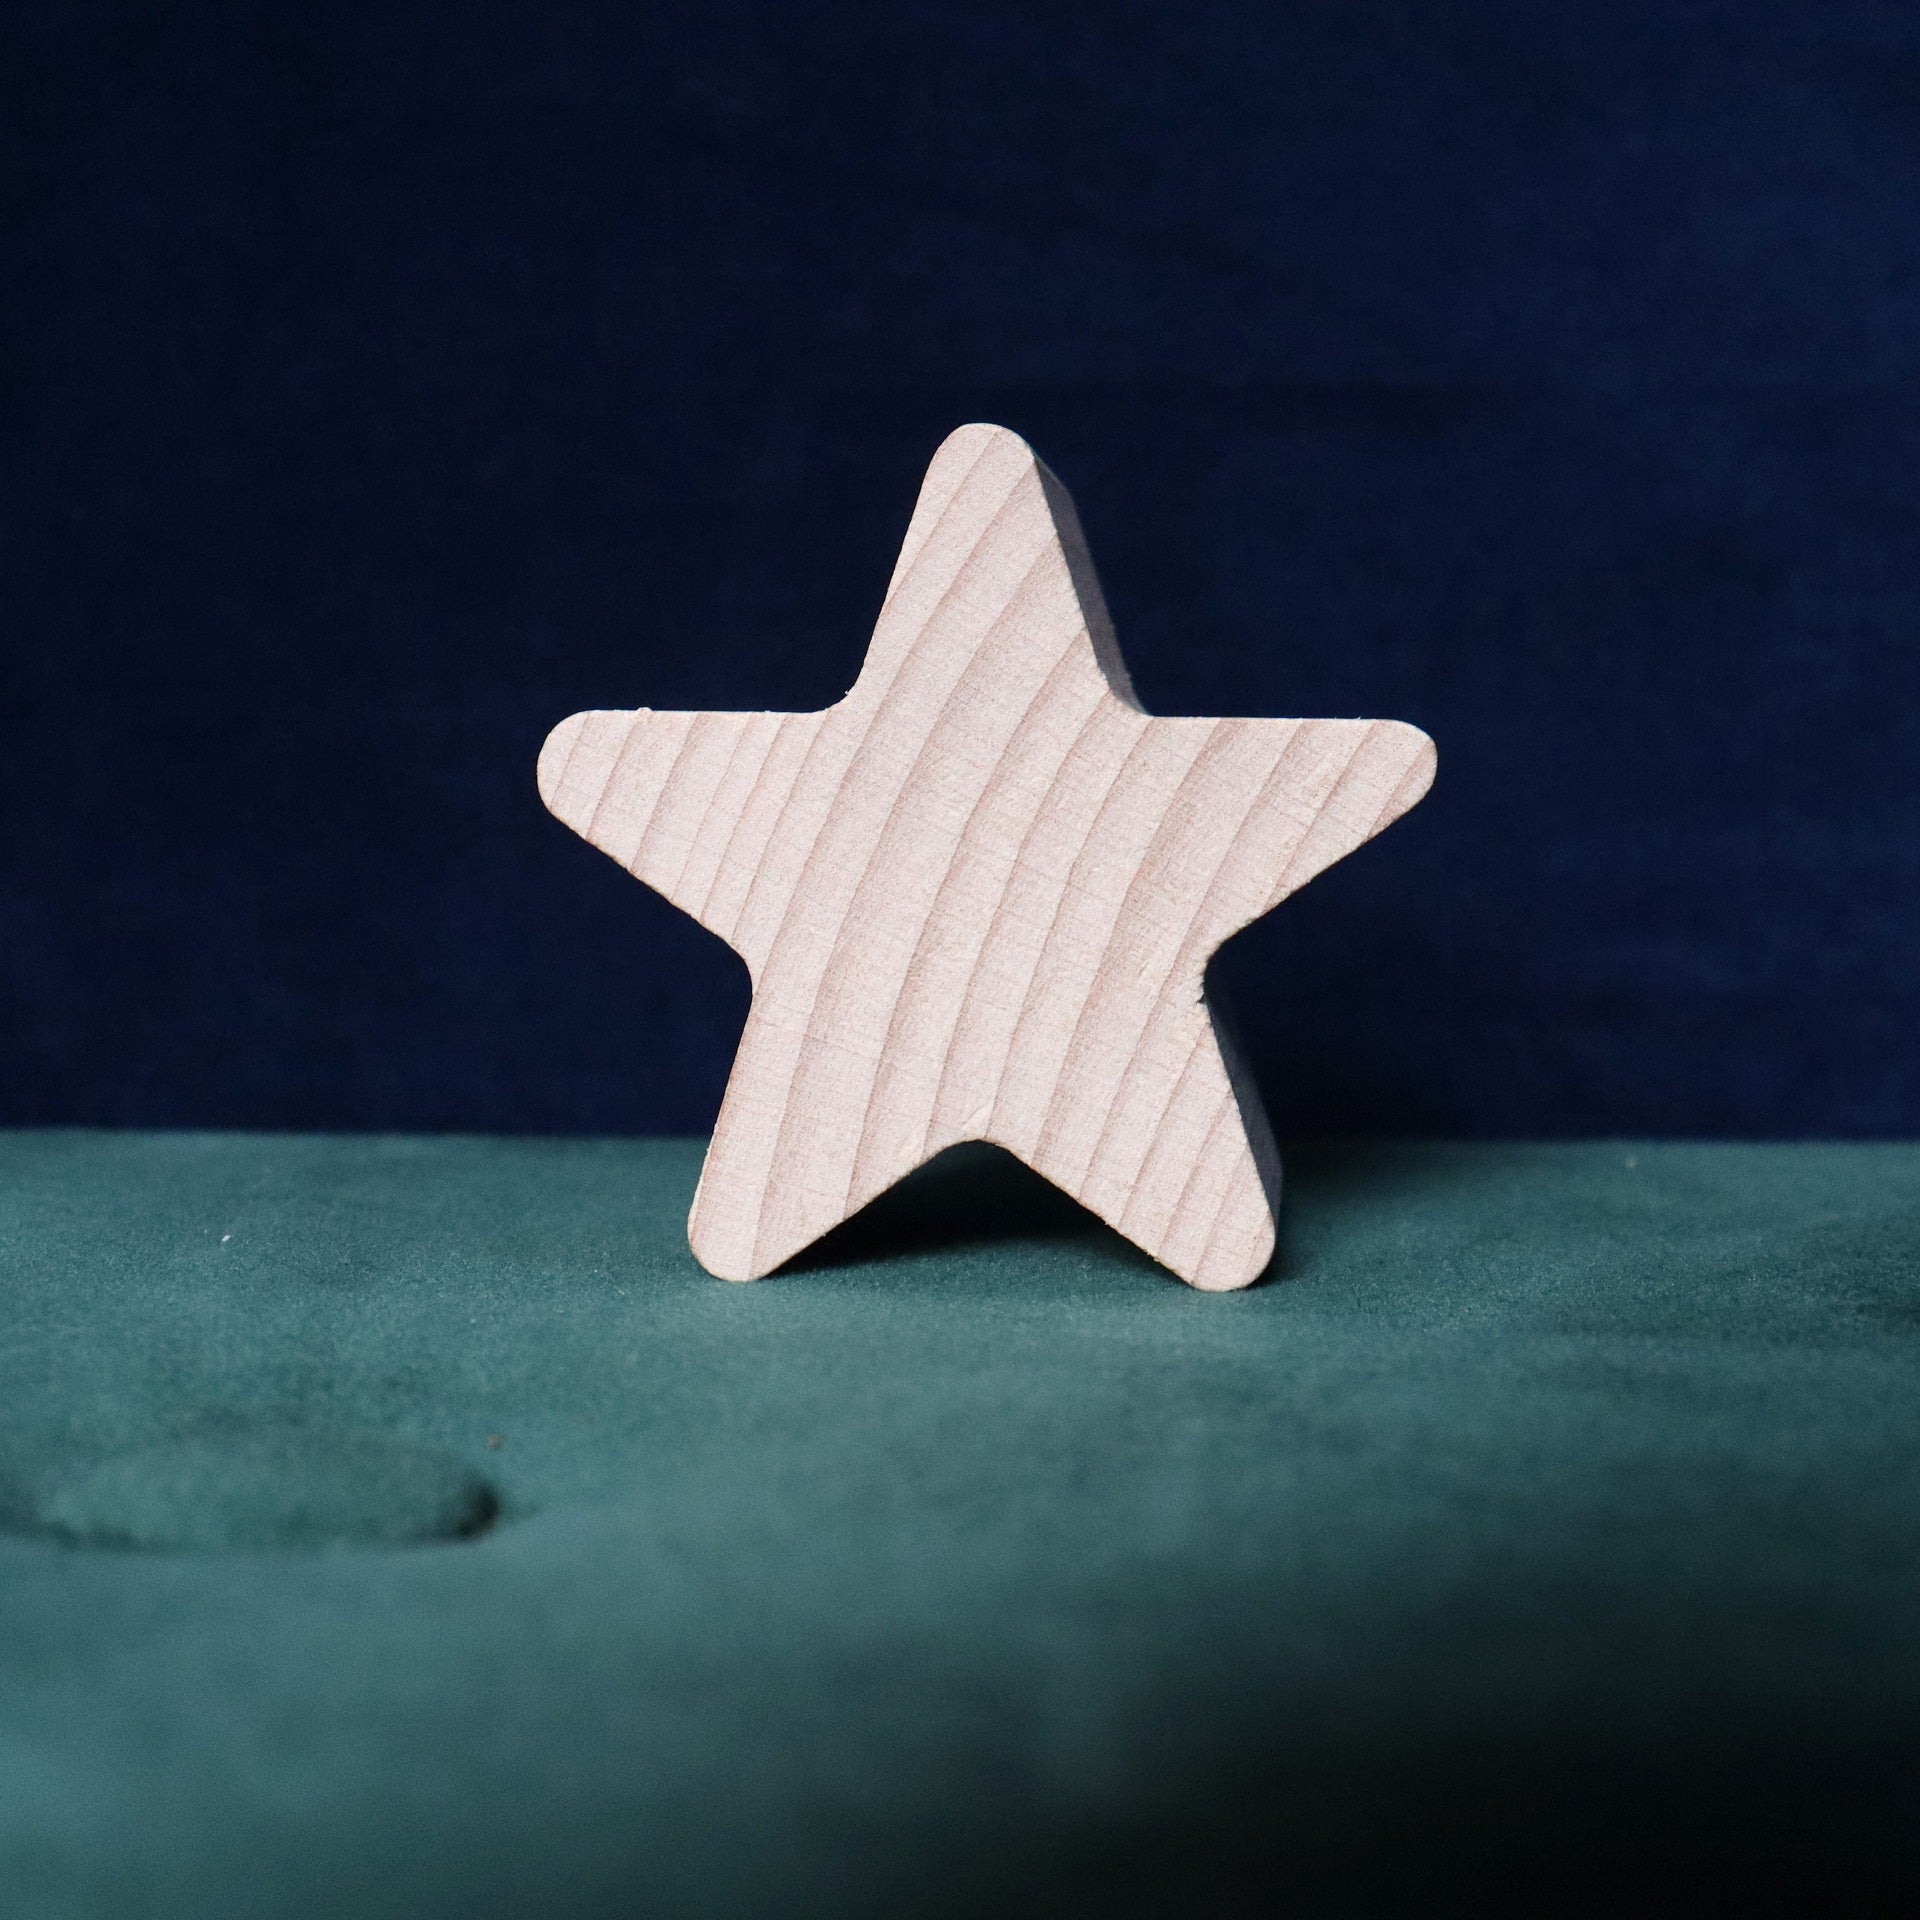 Natural Wooden Stars, Our TickiT® Natural Wooden Stars are made from beautiful smooth solid beechwood with a natural woodgrain finish. An inspiring addition to our heuristic play range. Chunky and tactile, they are easy for small hands to manipulate, stack, count, sequence and explore. These simple and curious natural smooth wooden stars will spark your child's imagination and encourage them to explore ways to incorporate them into imaginative play and learn about the world around them. Quite simply, they s